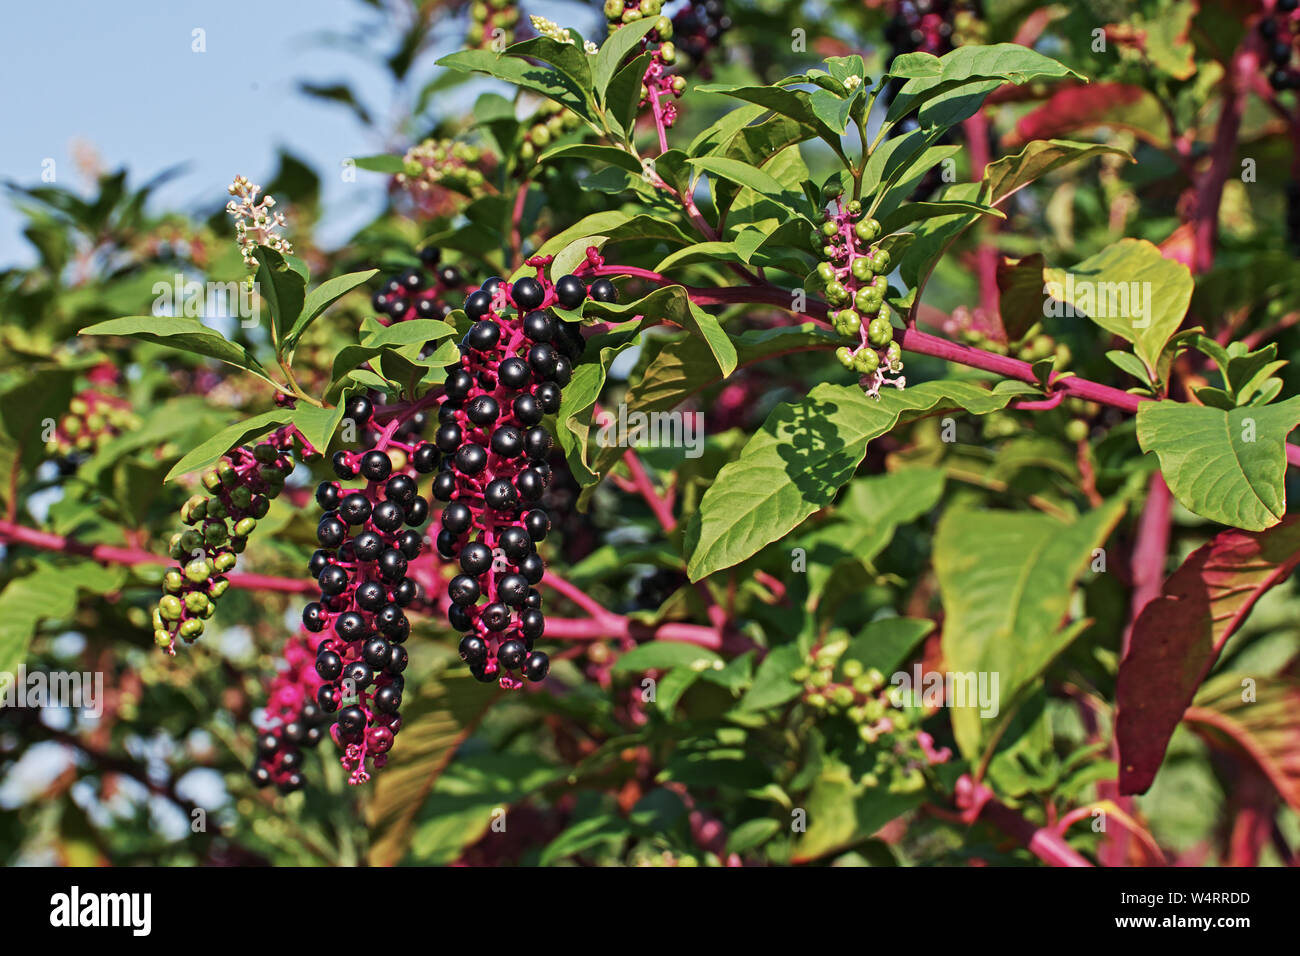 leaves, flowers, unripe and ripe berries of american pokeweed, Phytolacca americana Stock Photo